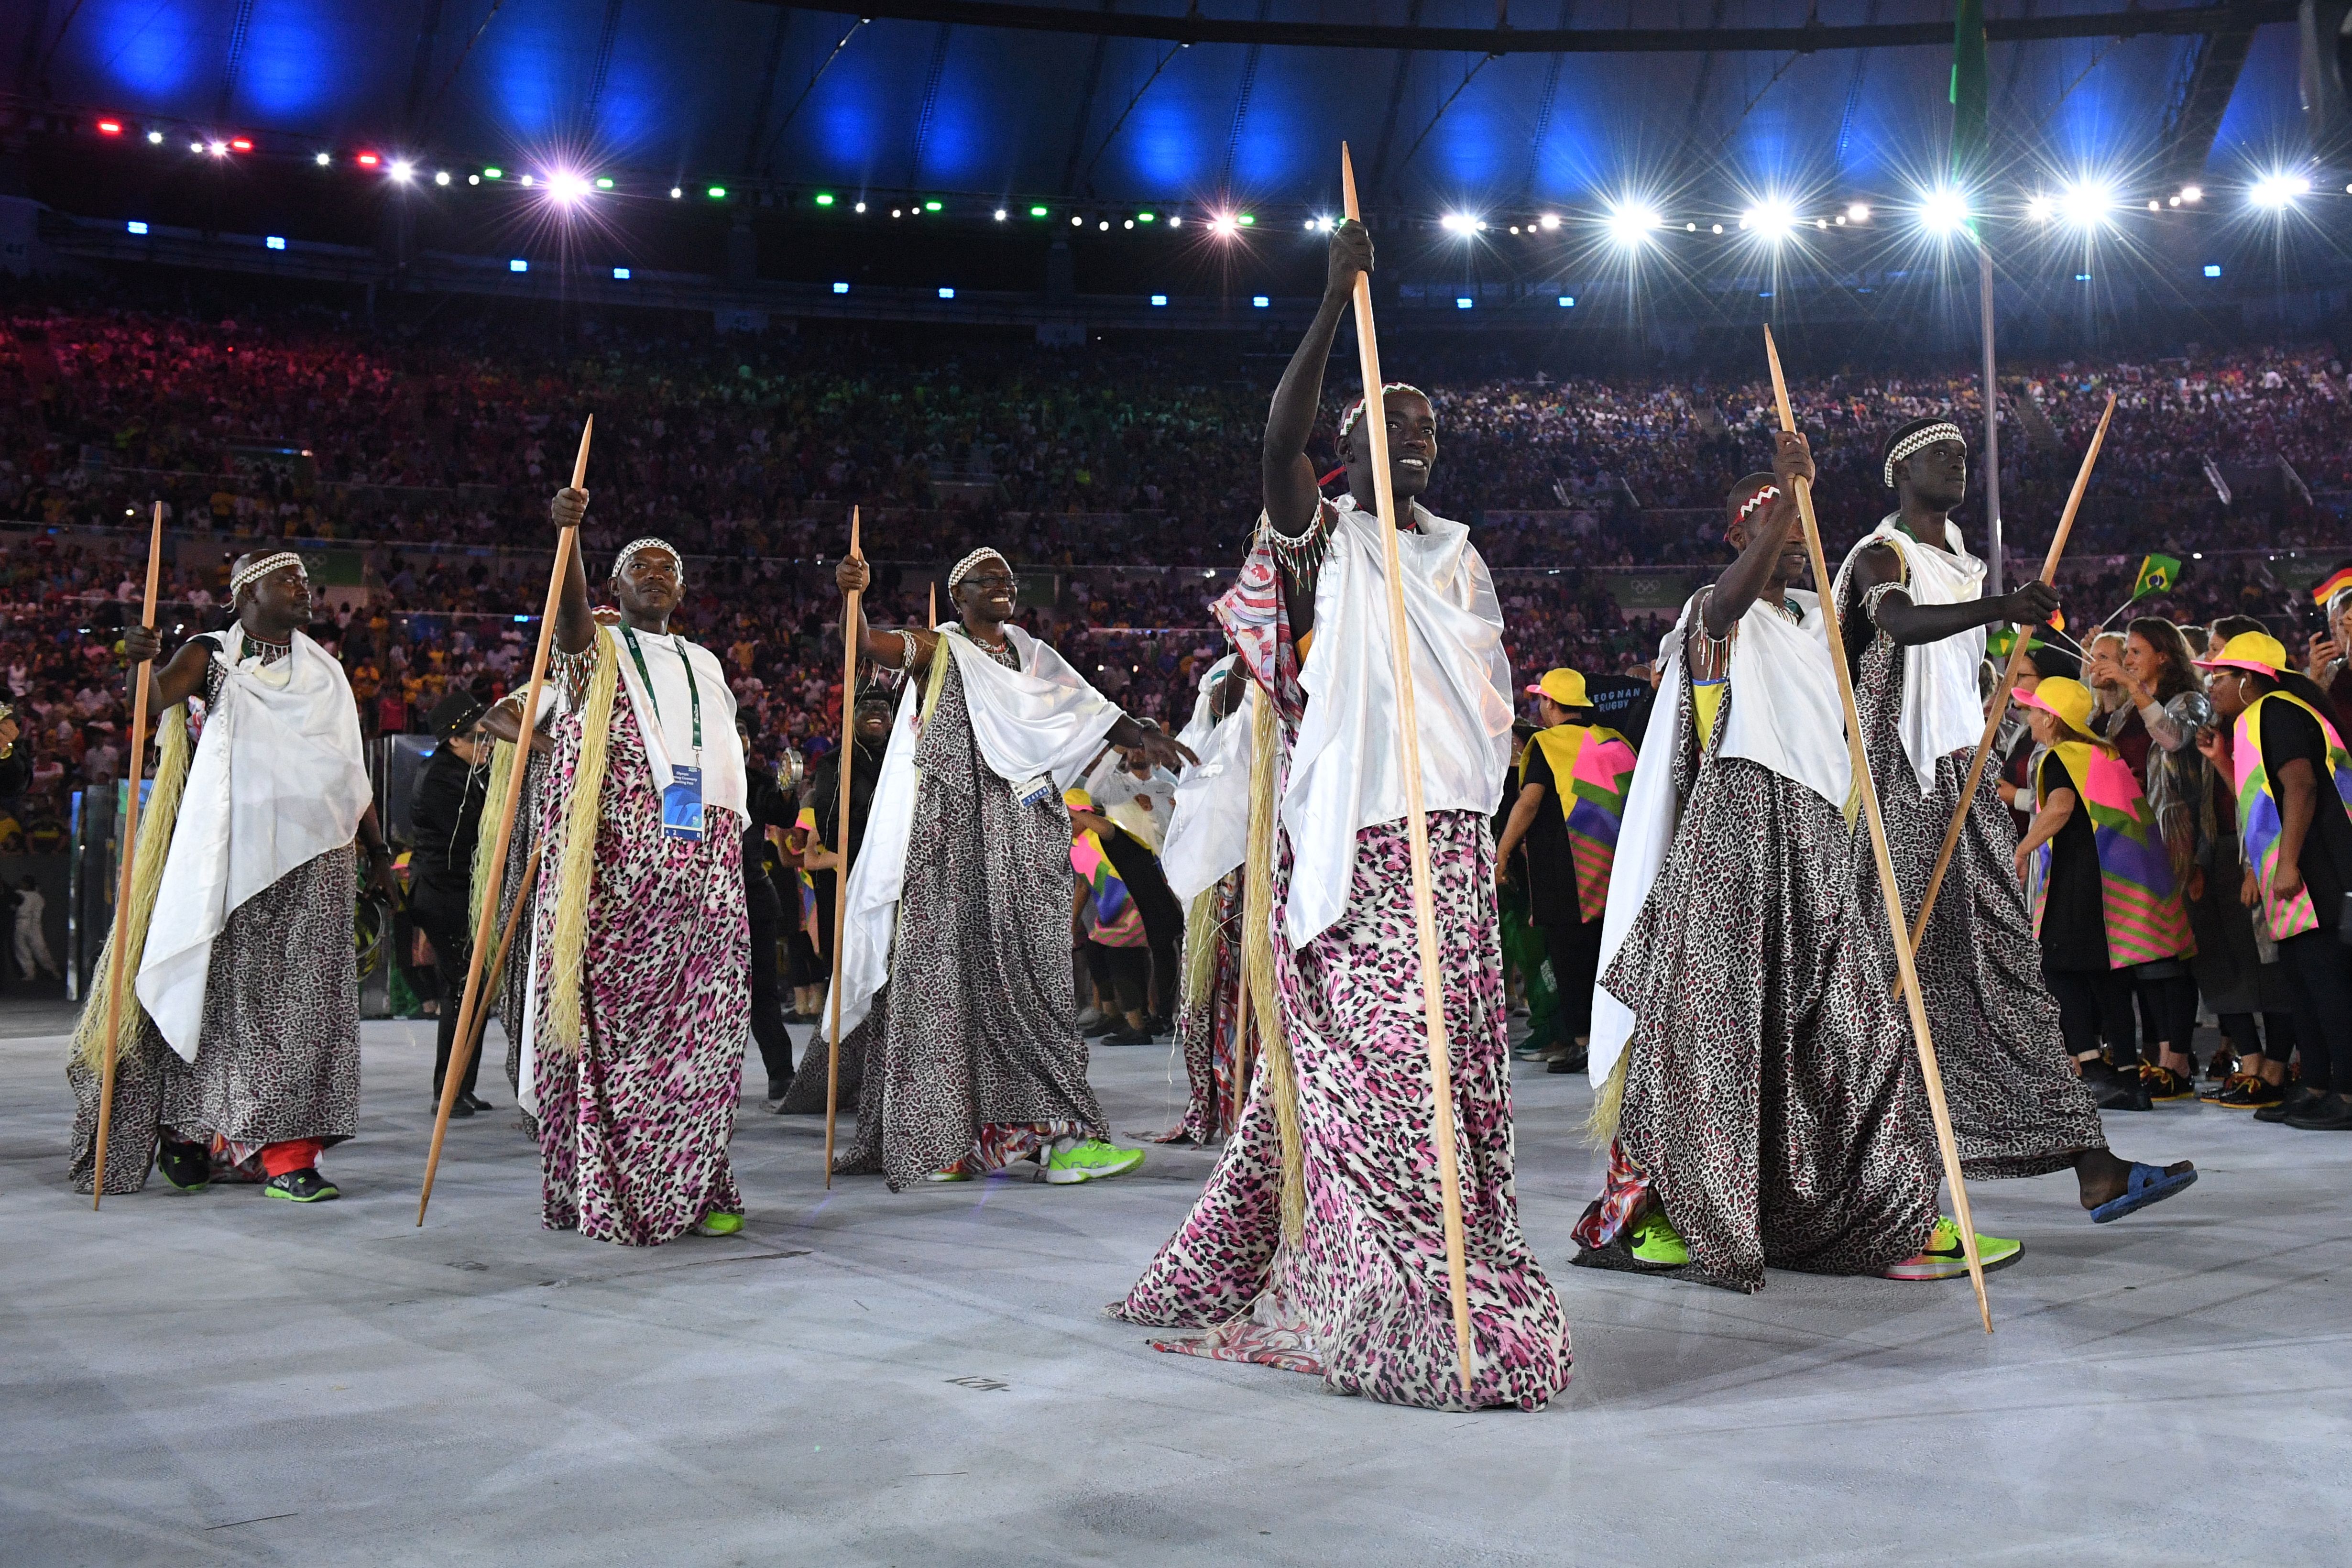 How Long Is The Parade Of Nations At The Olympics Opening Ceremony? Let